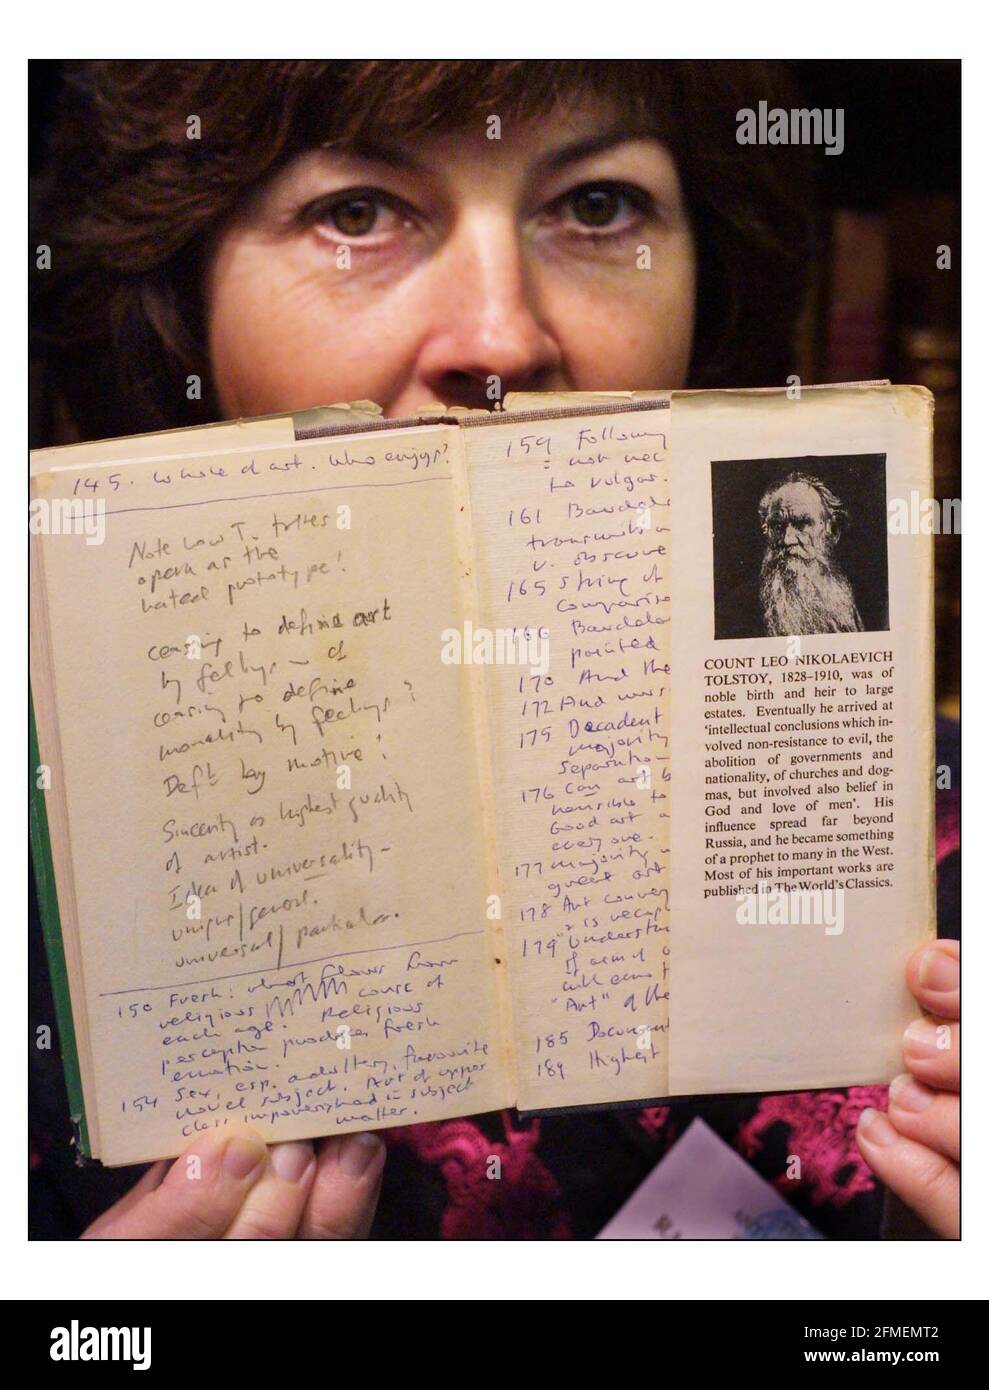 The Antiquarian Book fair....A collection of books owned by Iris Murdoch with notes handwriten by herself are on sale by Rachel Lee (in pic) Rare Books at the book fair held in Olympia 2 exhibition hall in London, Thurs 5 June to Sun 8 June.pic David Sandison 5/6/2003 Stock Photo